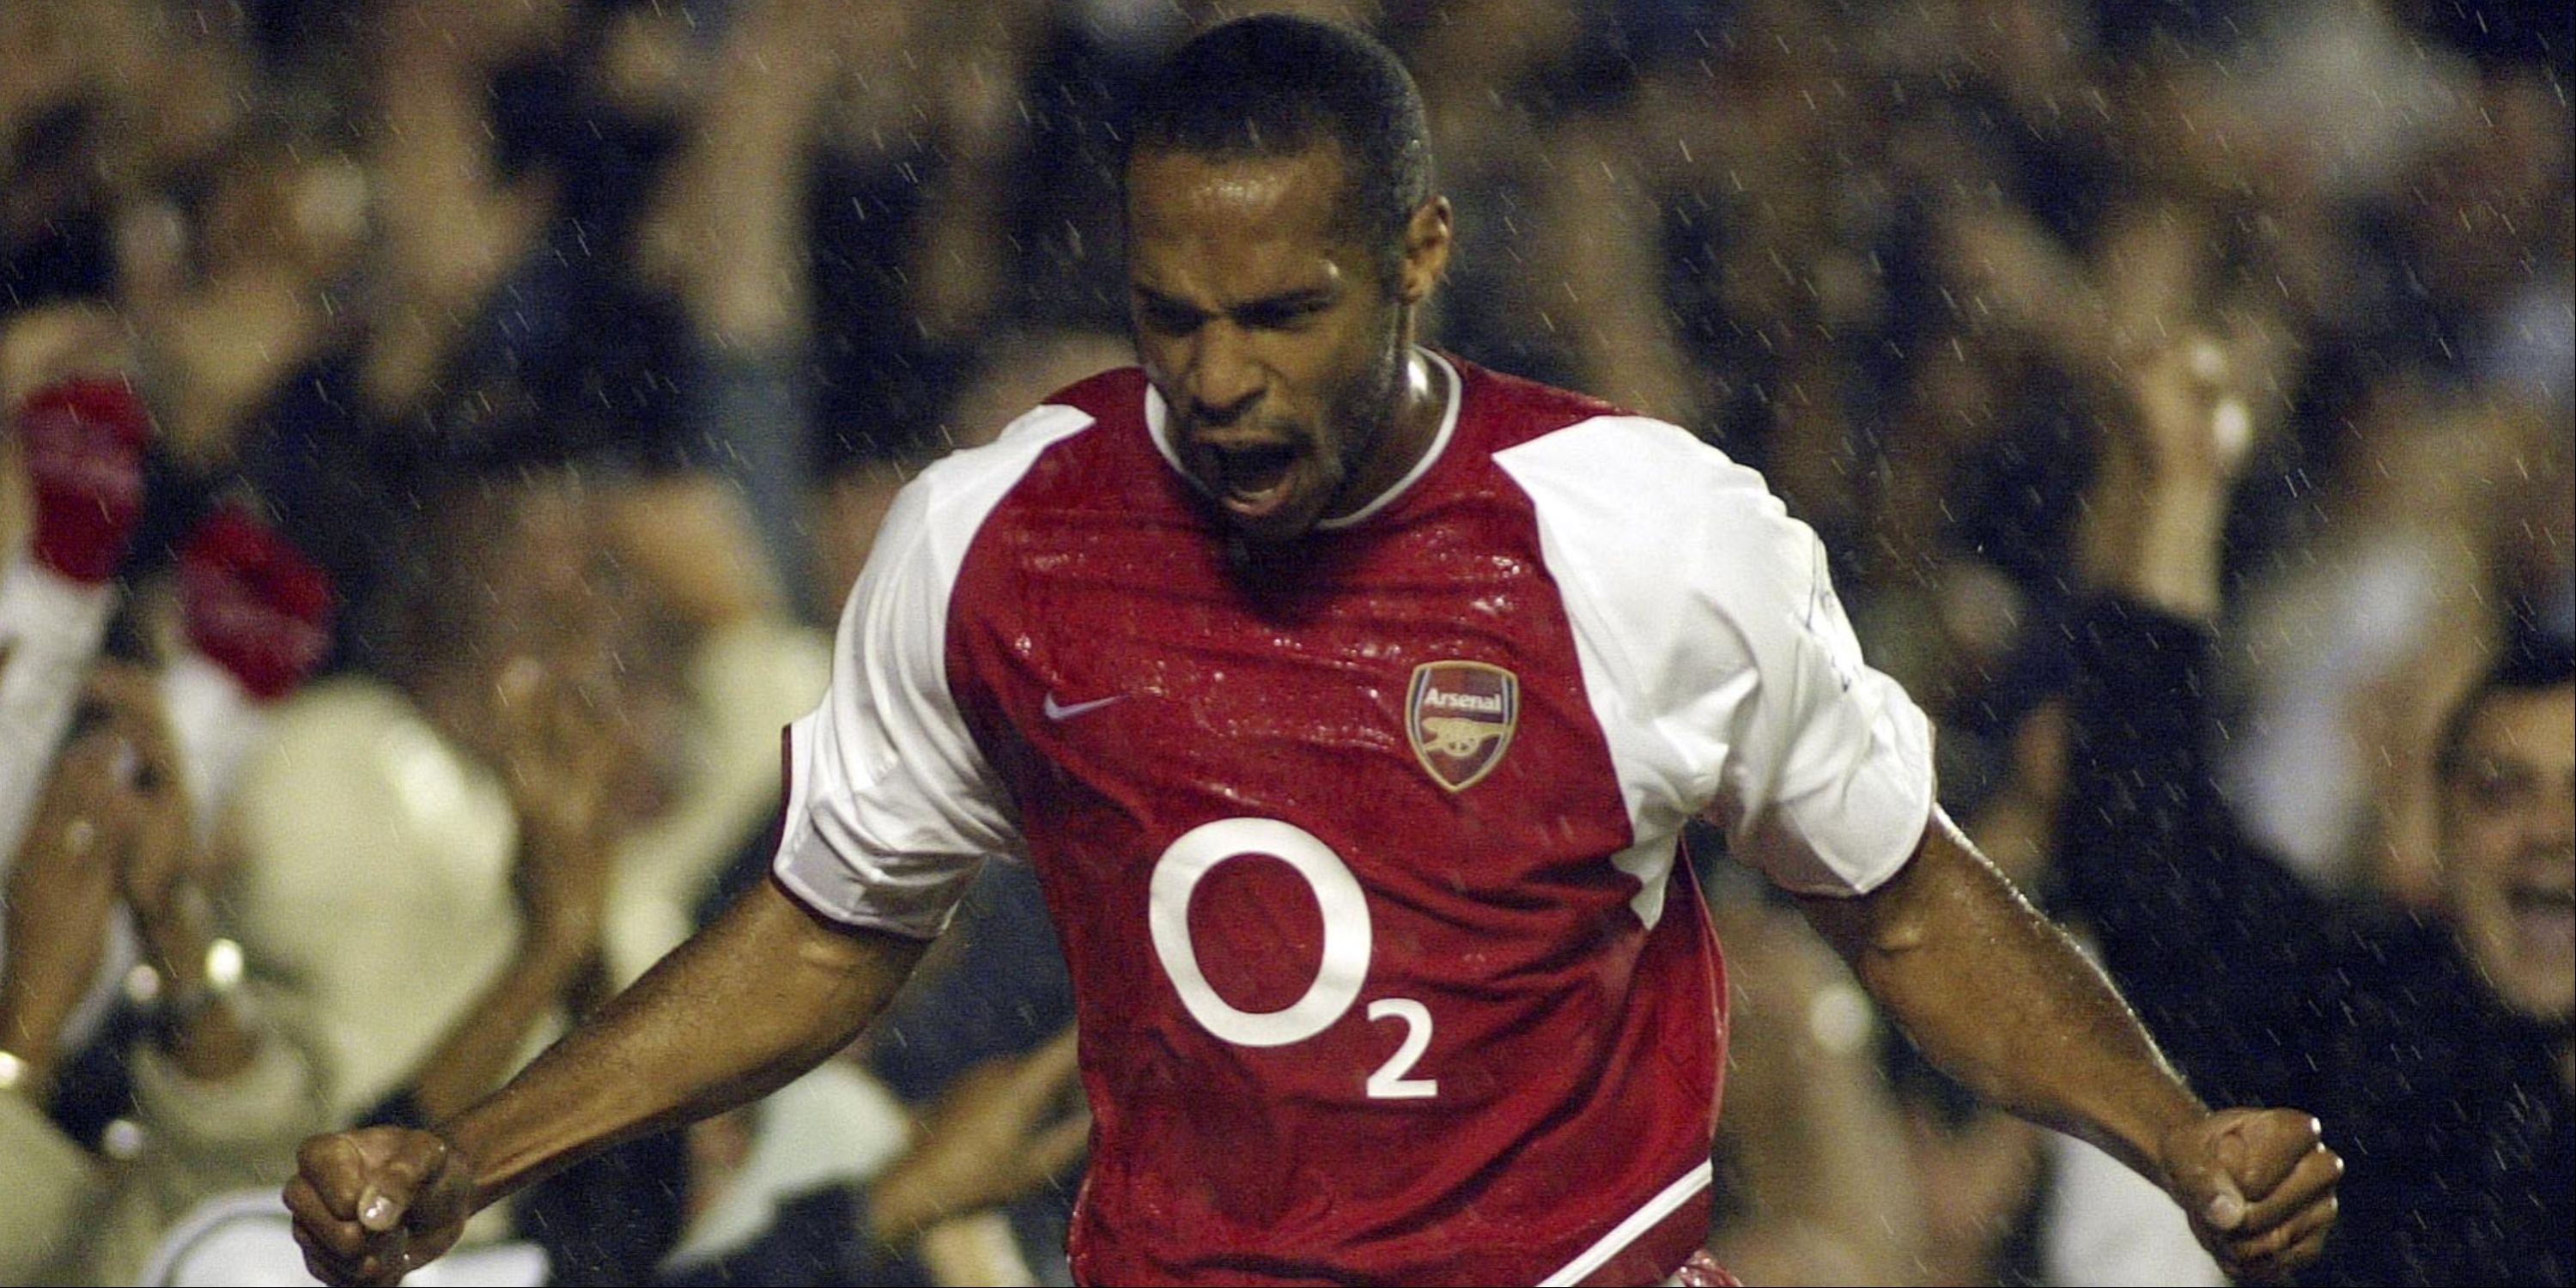 Arsenal's Thierry Henry celebrating yet another goal